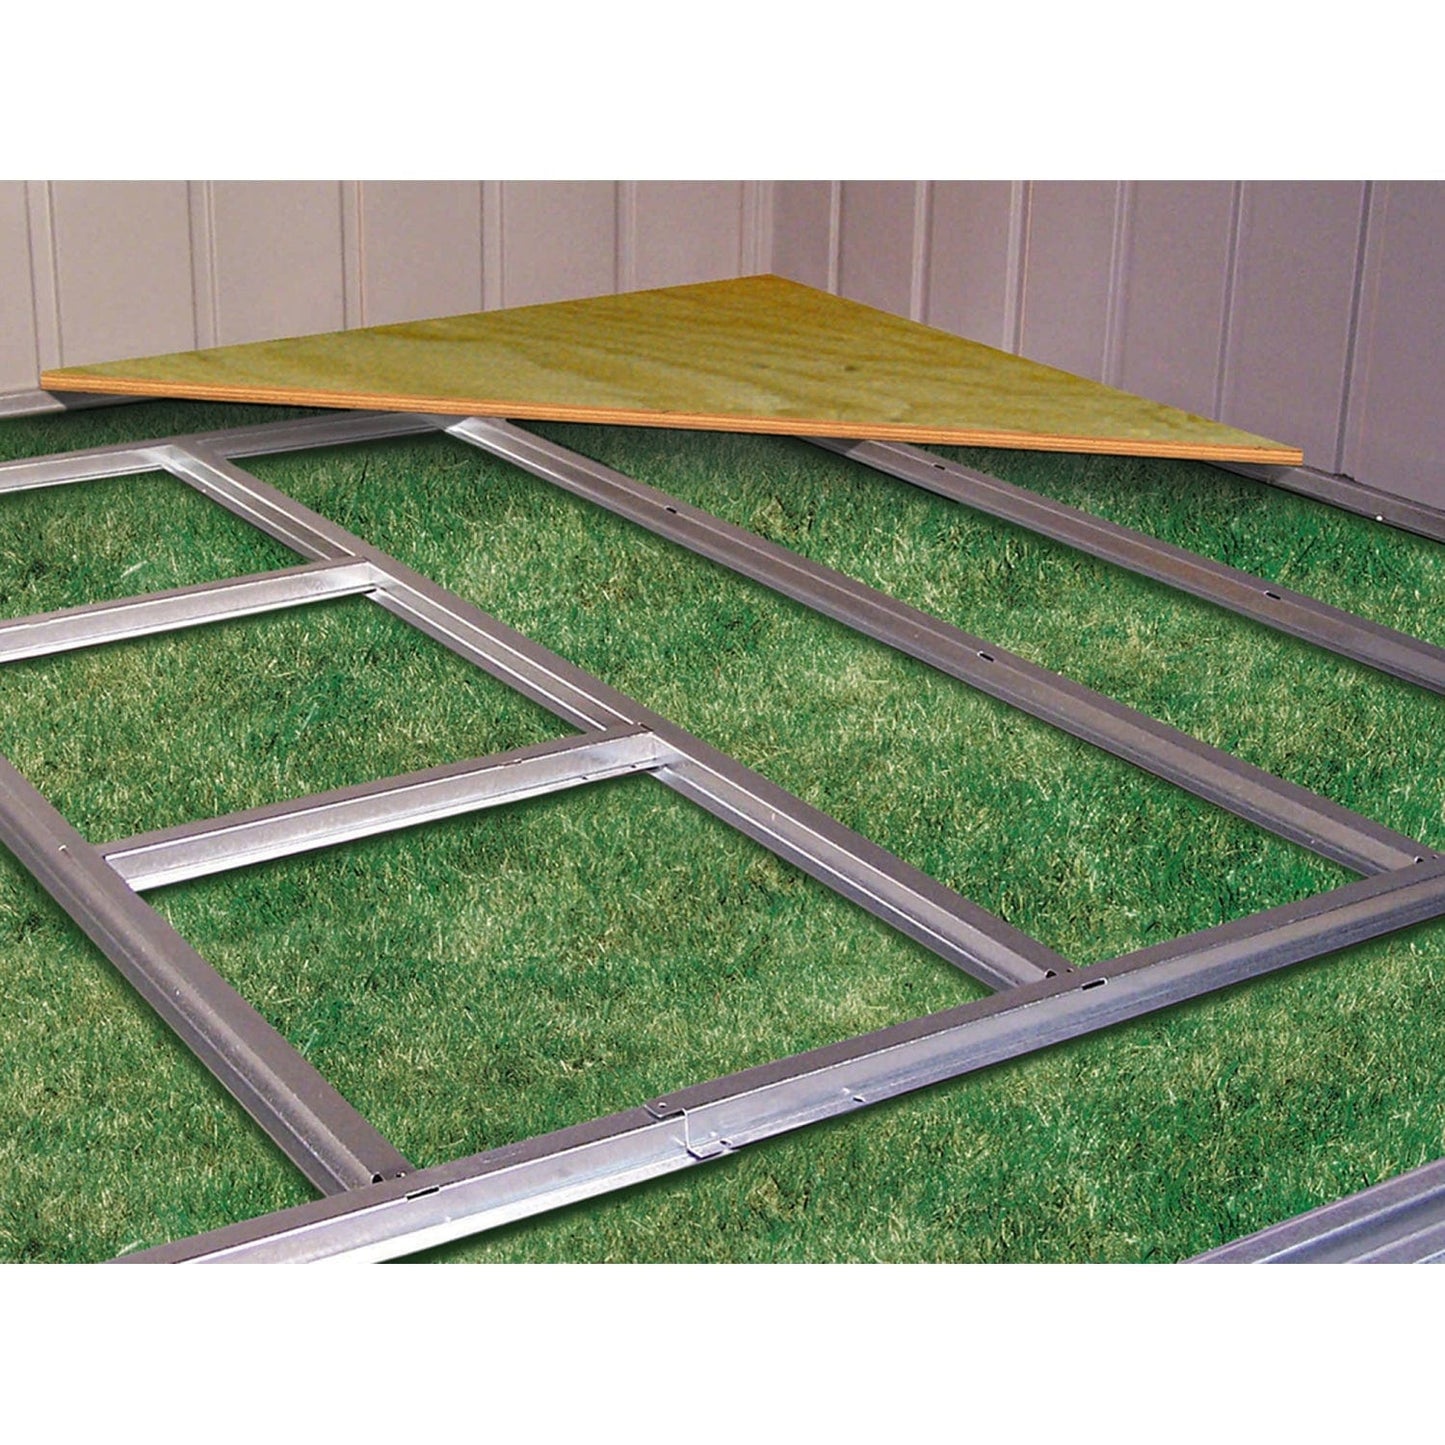 Arrow Shed Accessories Arrow | Floor Frame Kit for Arrow Elite Sheds 6x4, 8x4, and 10x4 ft. FKE01